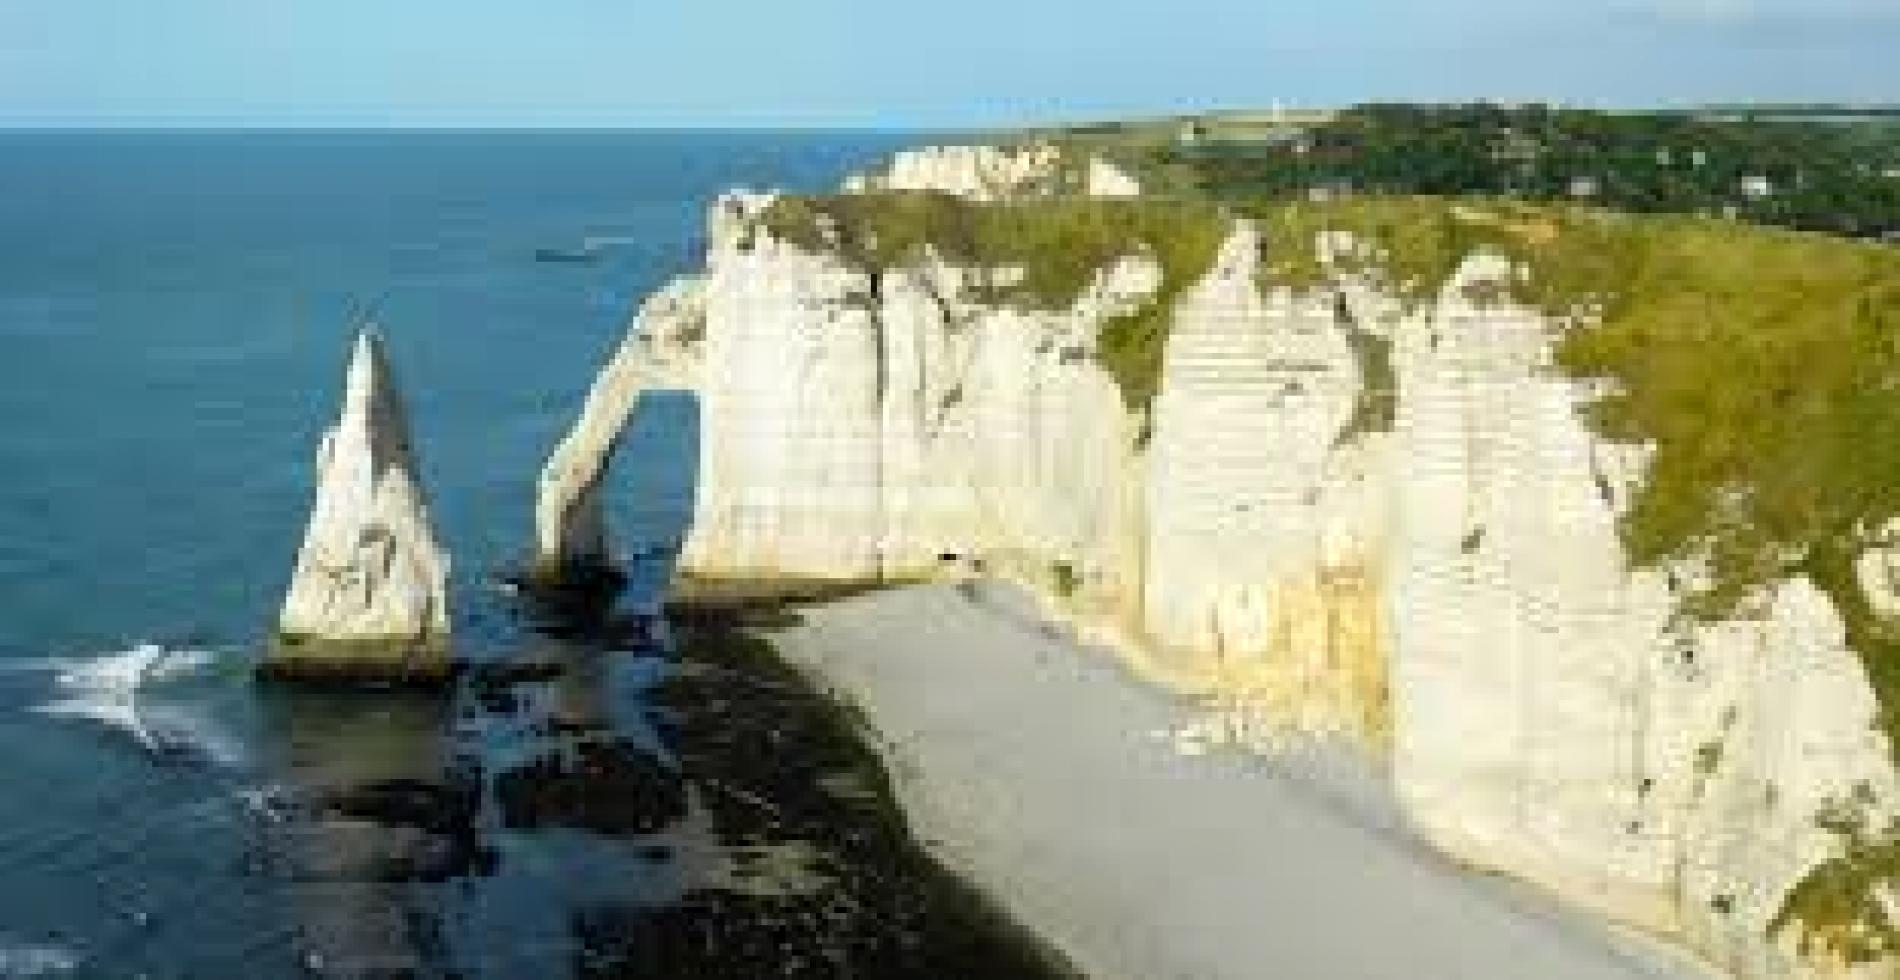 25 minutes from the town of Etretat